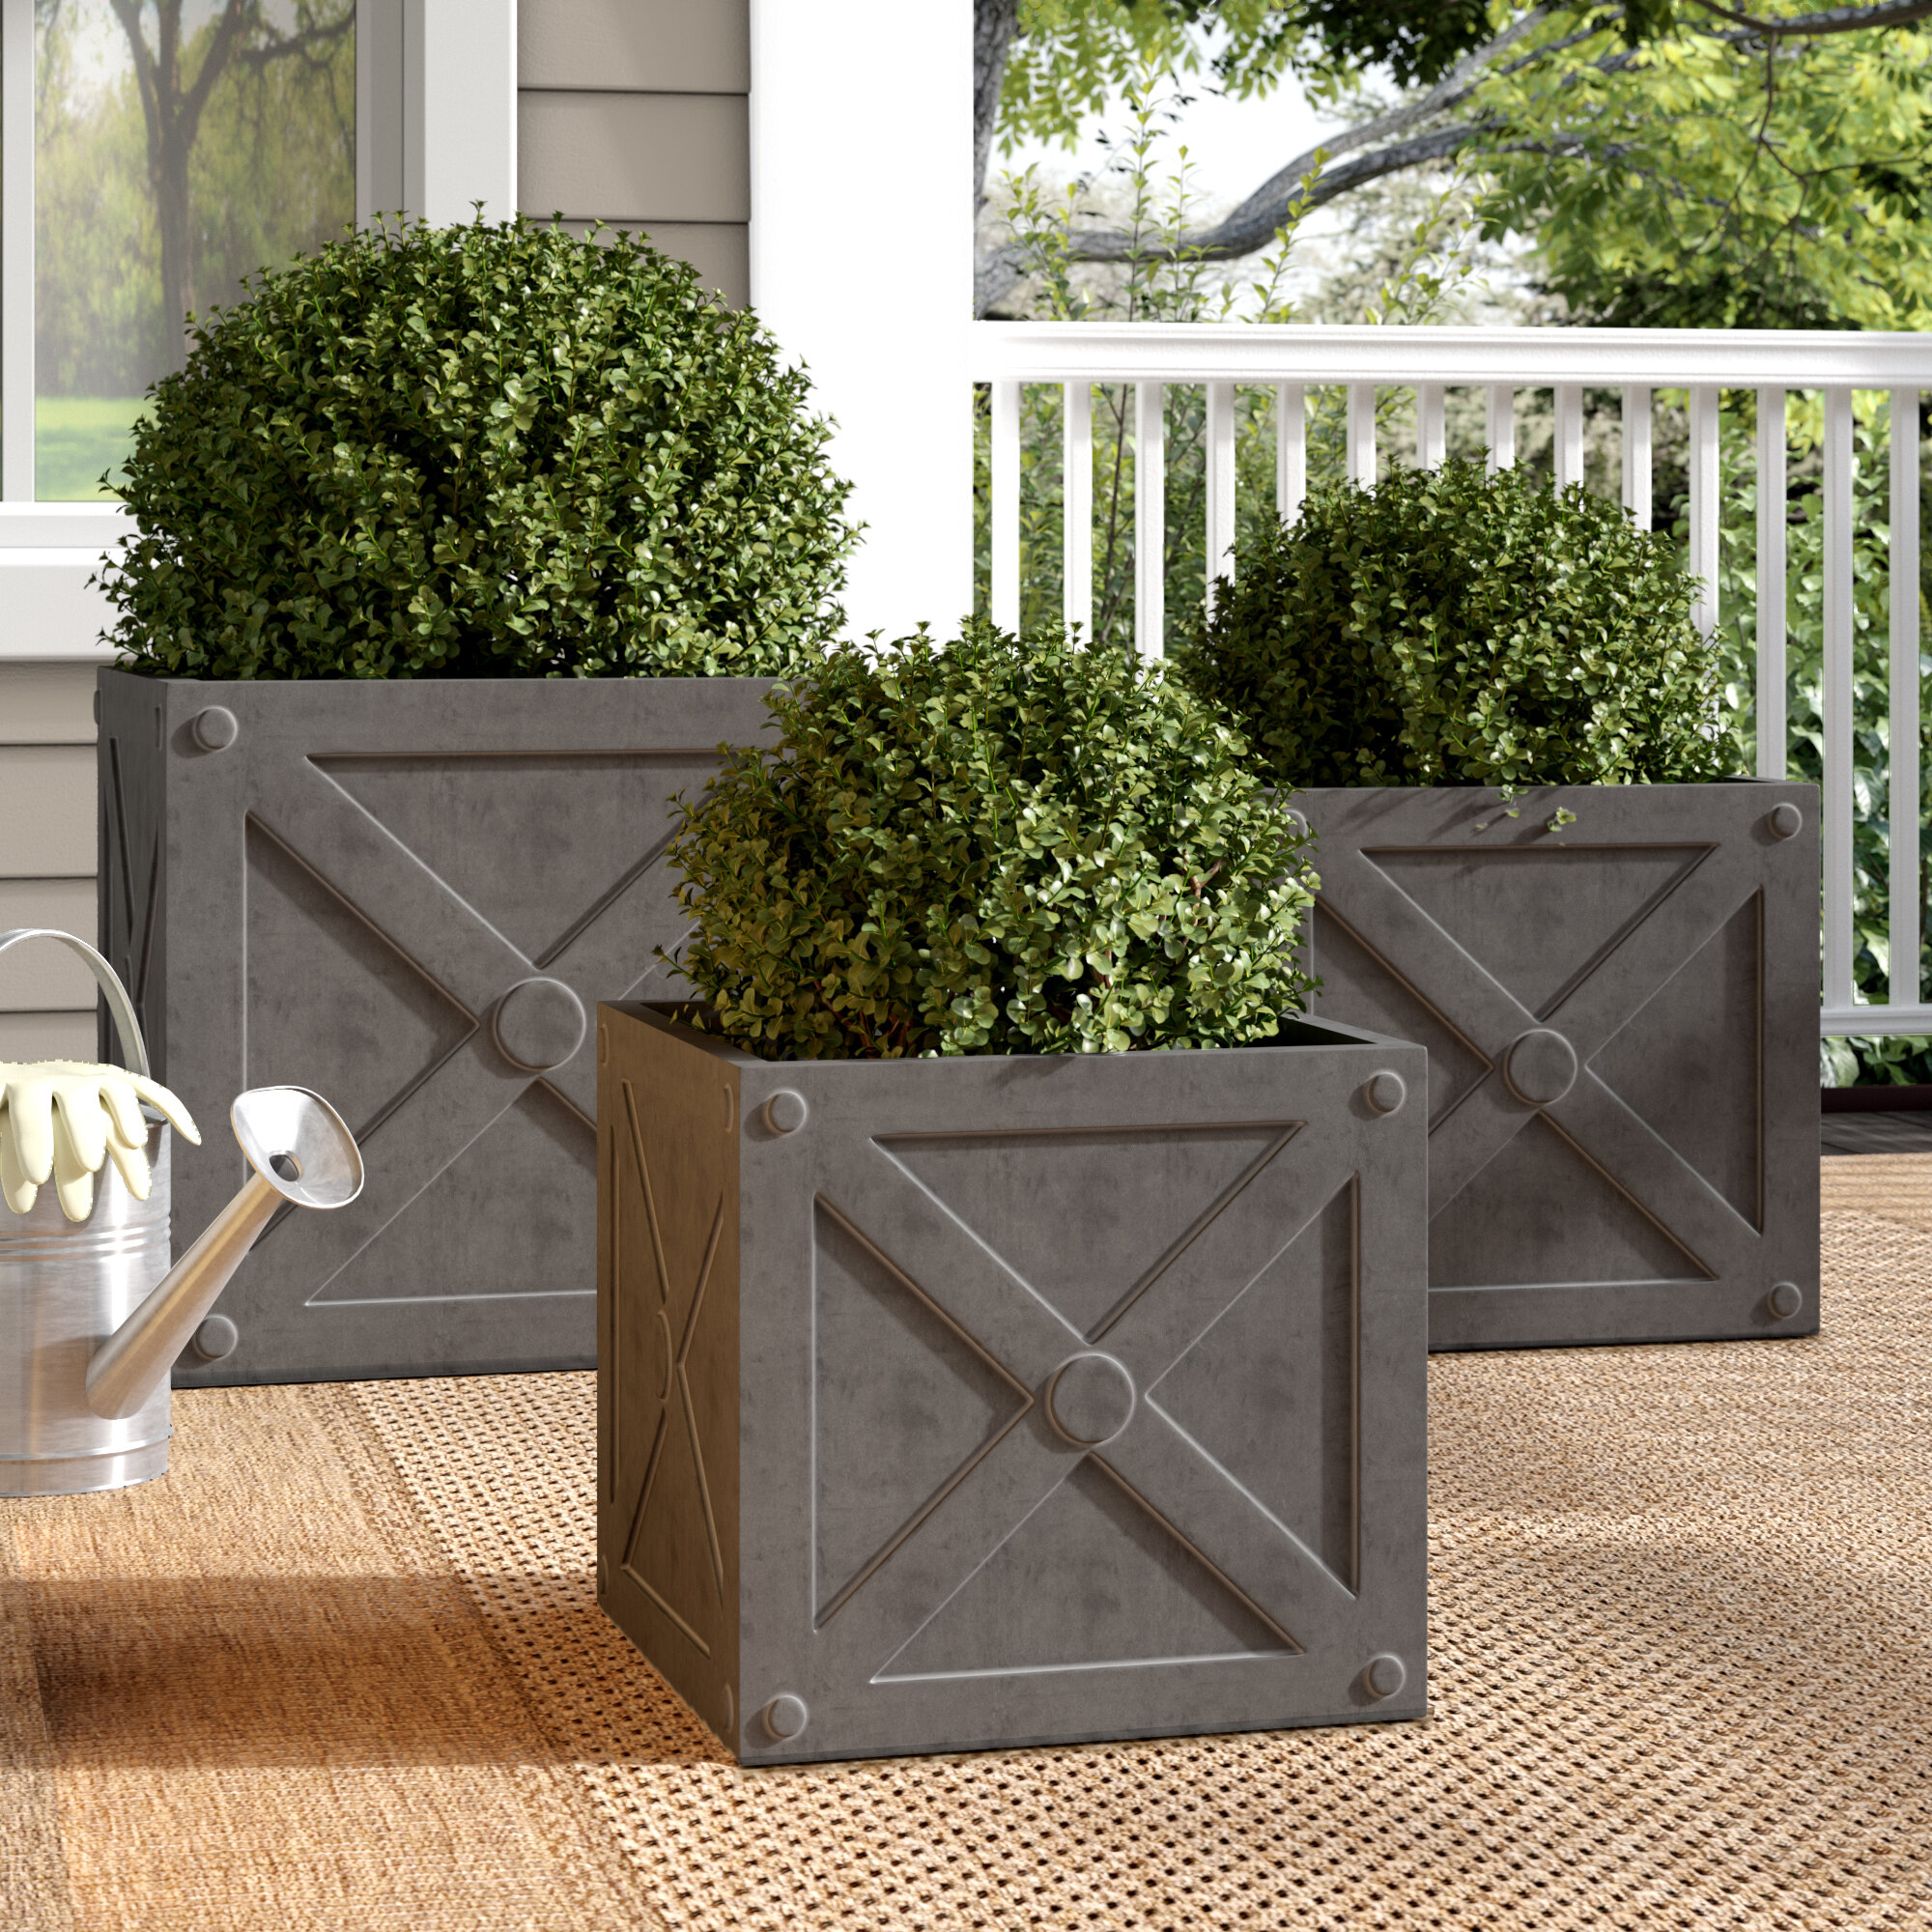 Set of 2 Envelope Shaped Wall Planters, Size: 12.5 x 12.25 x 4.4, Silver